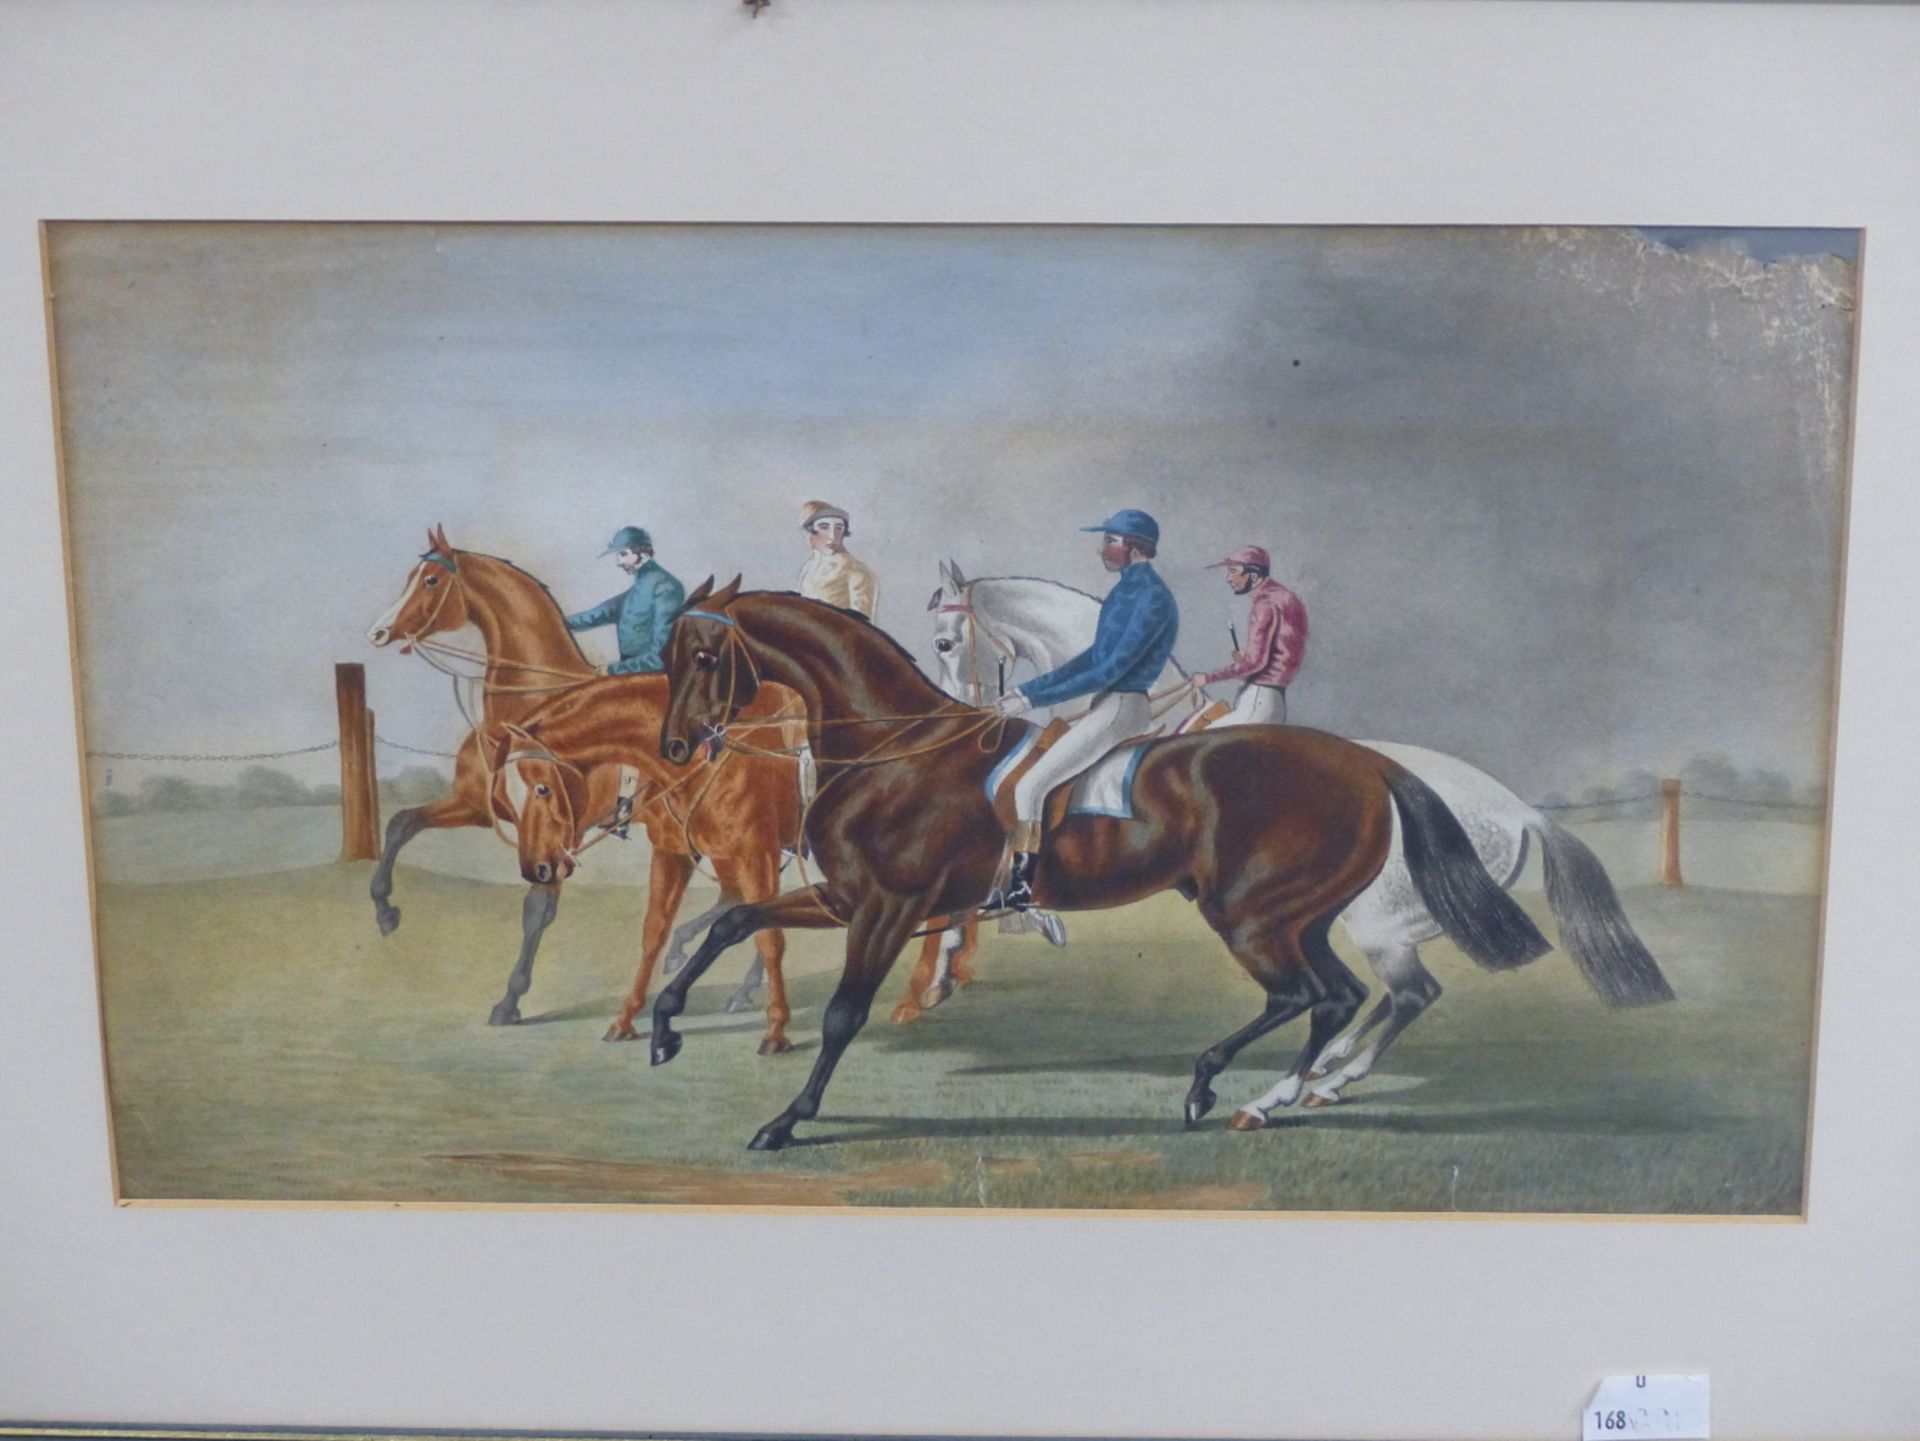 19th C. ENGLISH SCHOOL DANIEL O'ROUKE WINNING HE DERBY 1852, REPUTEDLY BY JAMES G. NOBLE, - Image 15 of 26